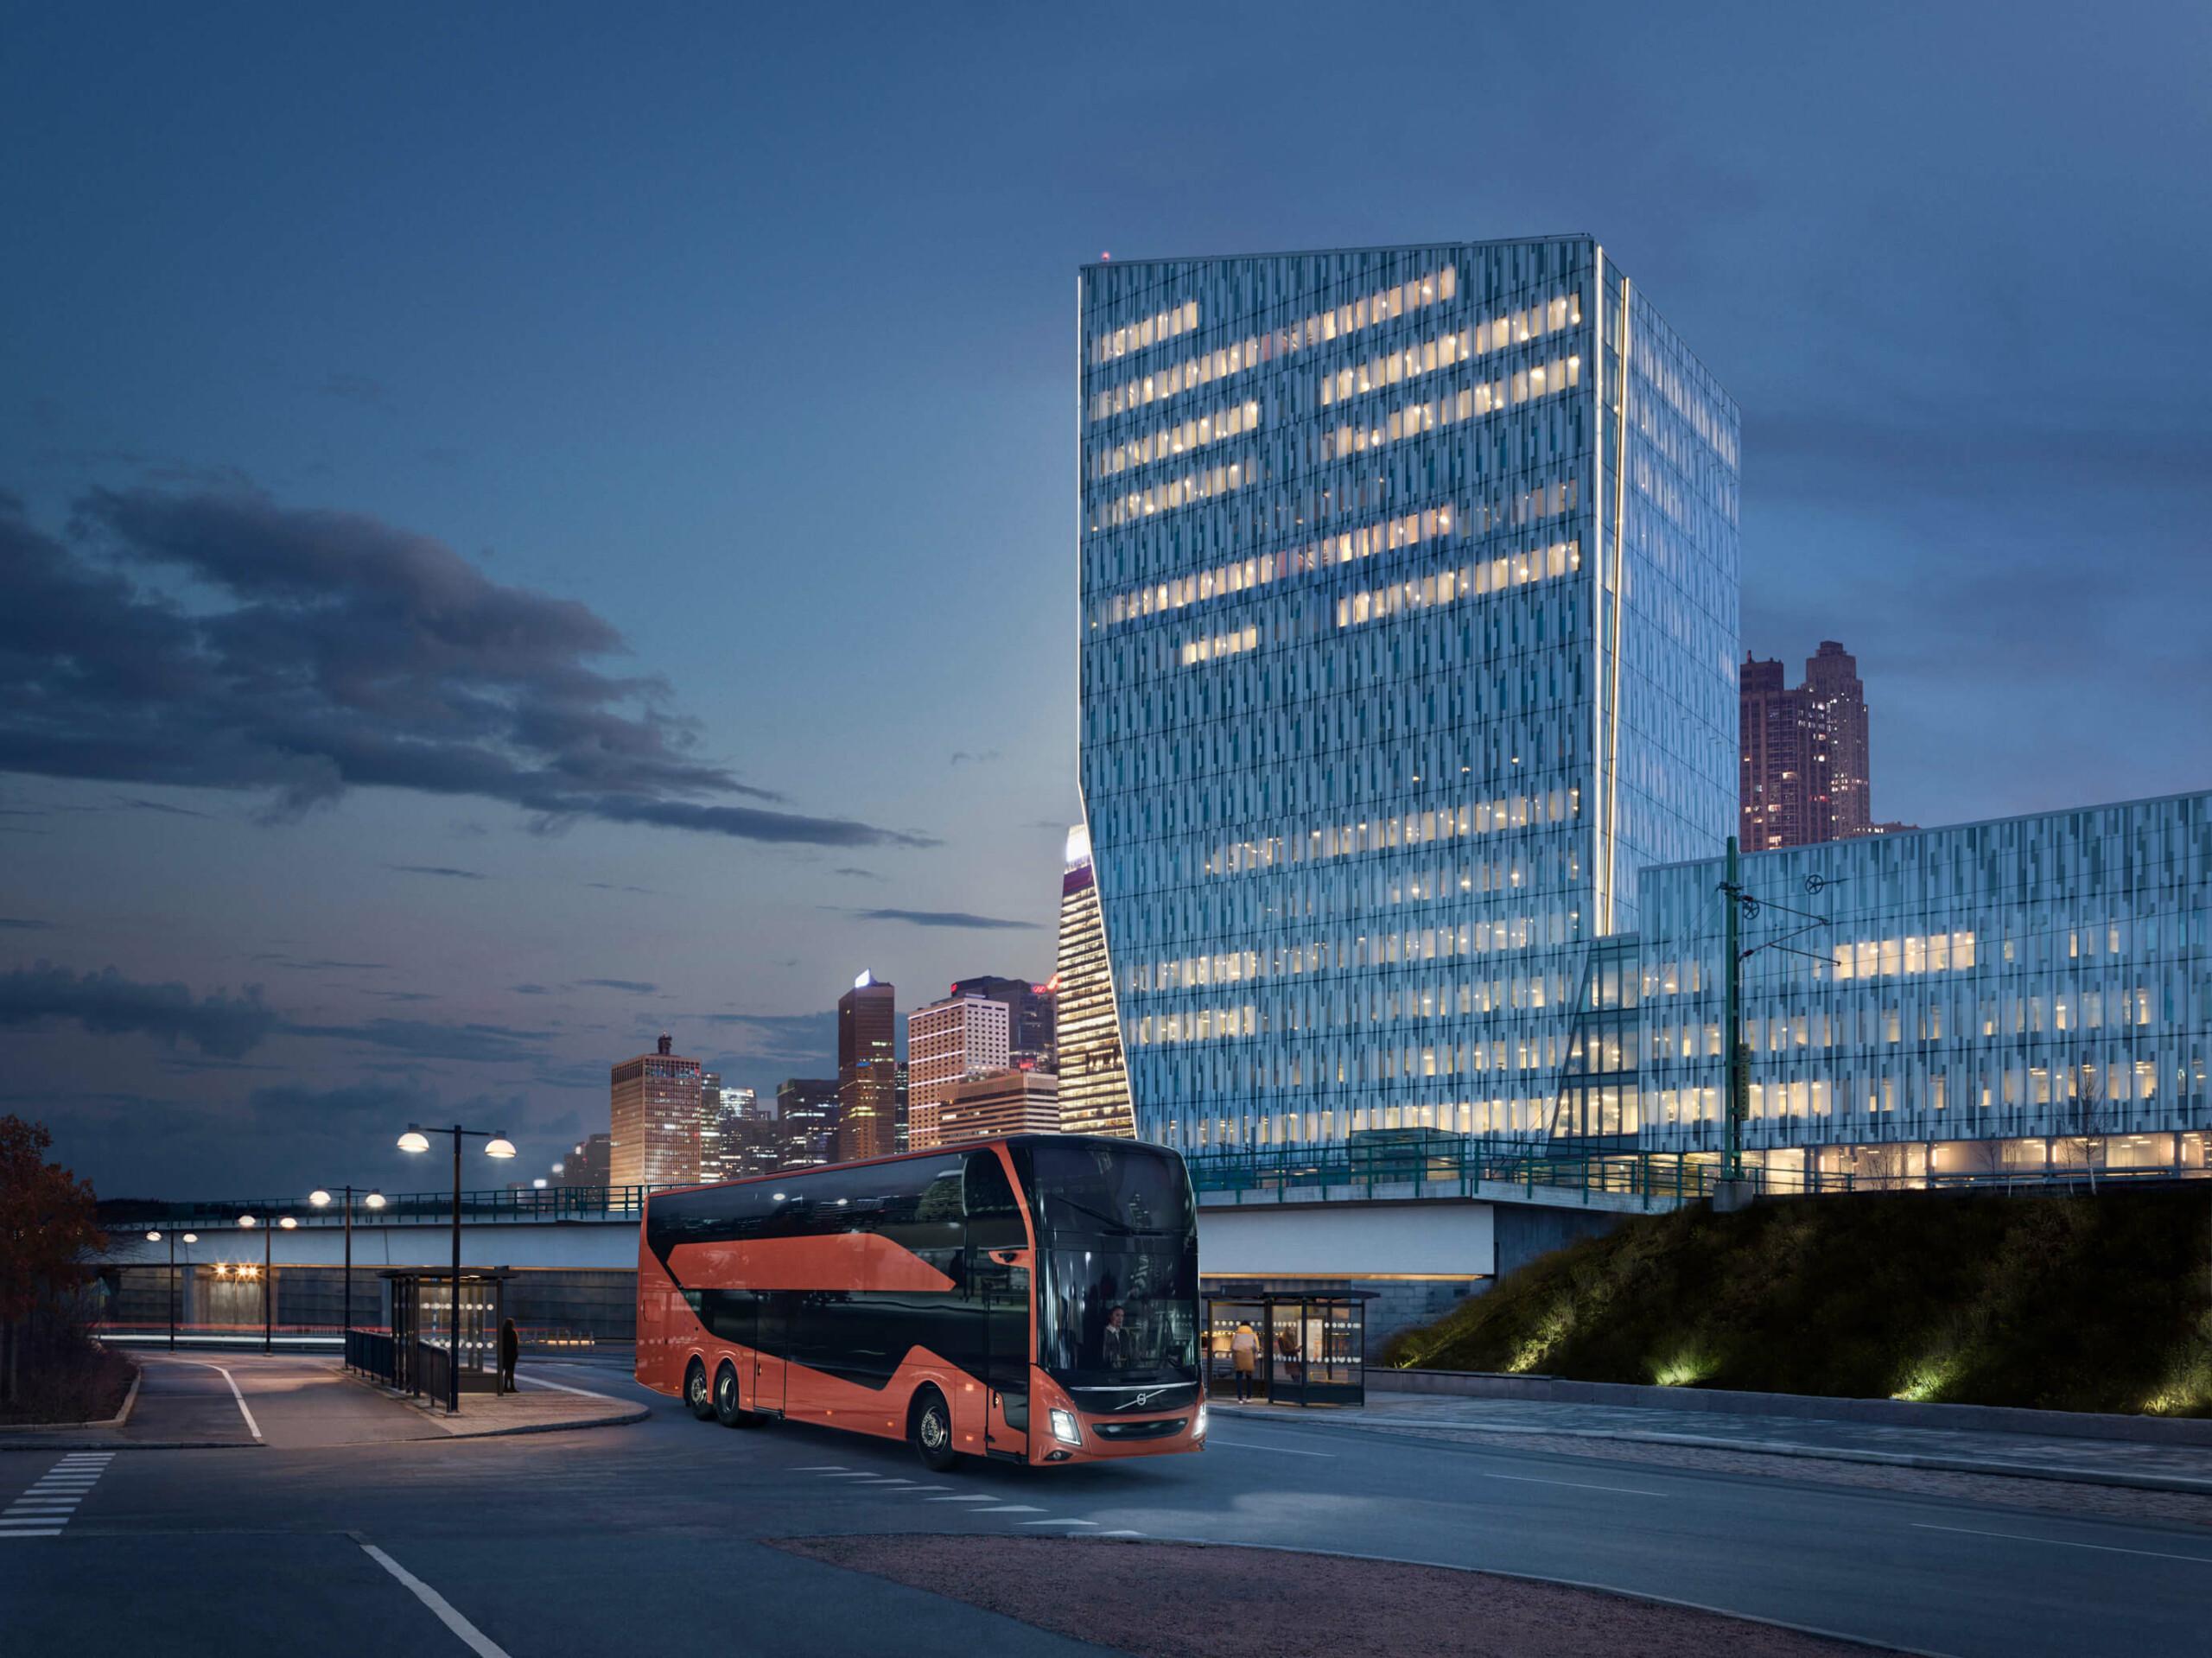 Volvo bus at city in the night